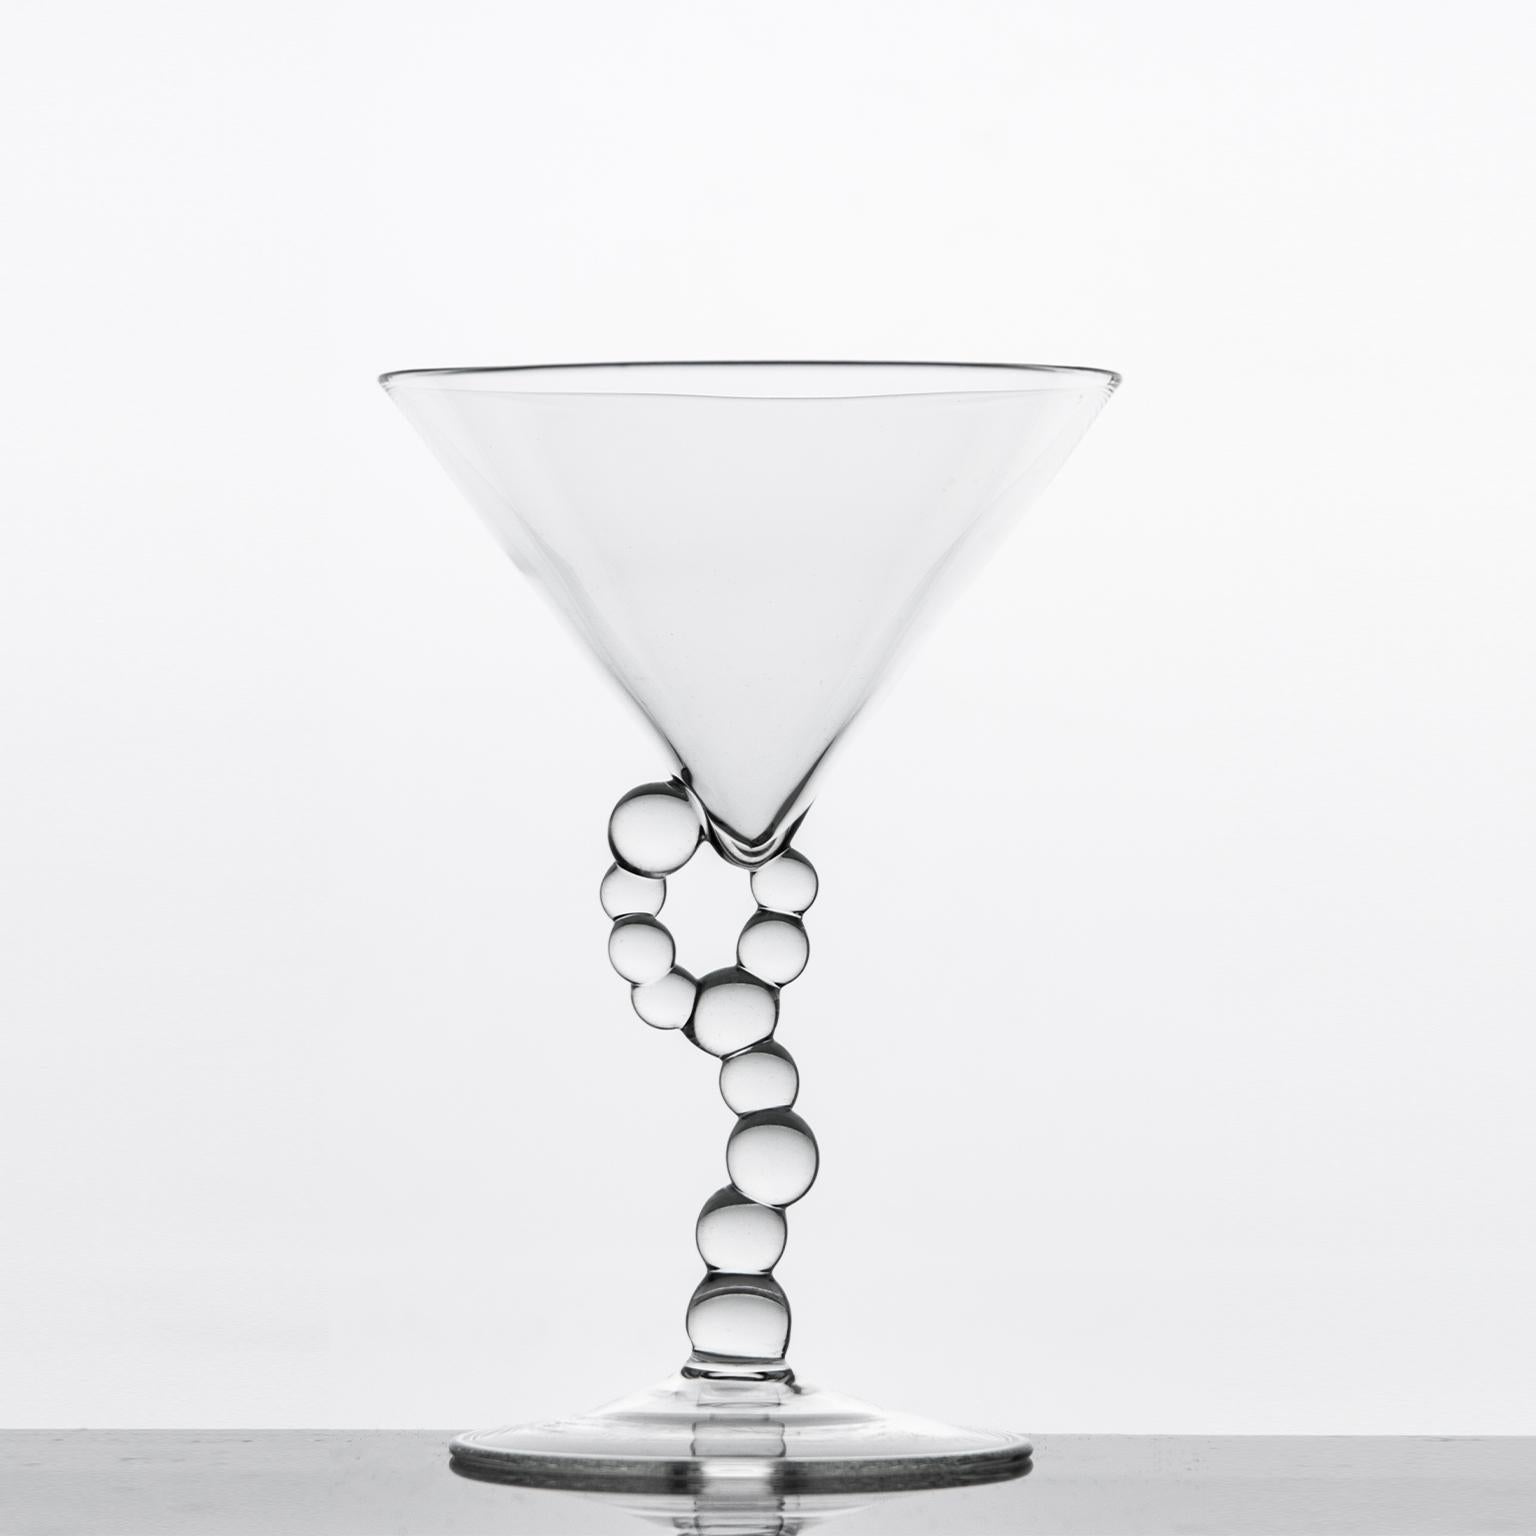 'Alchemica Martini Glass'
A Hand Blown Martini Glass by Simone Crestani

Alchemica Martini Glass is one of the pieces from the Alchemica Collection.

